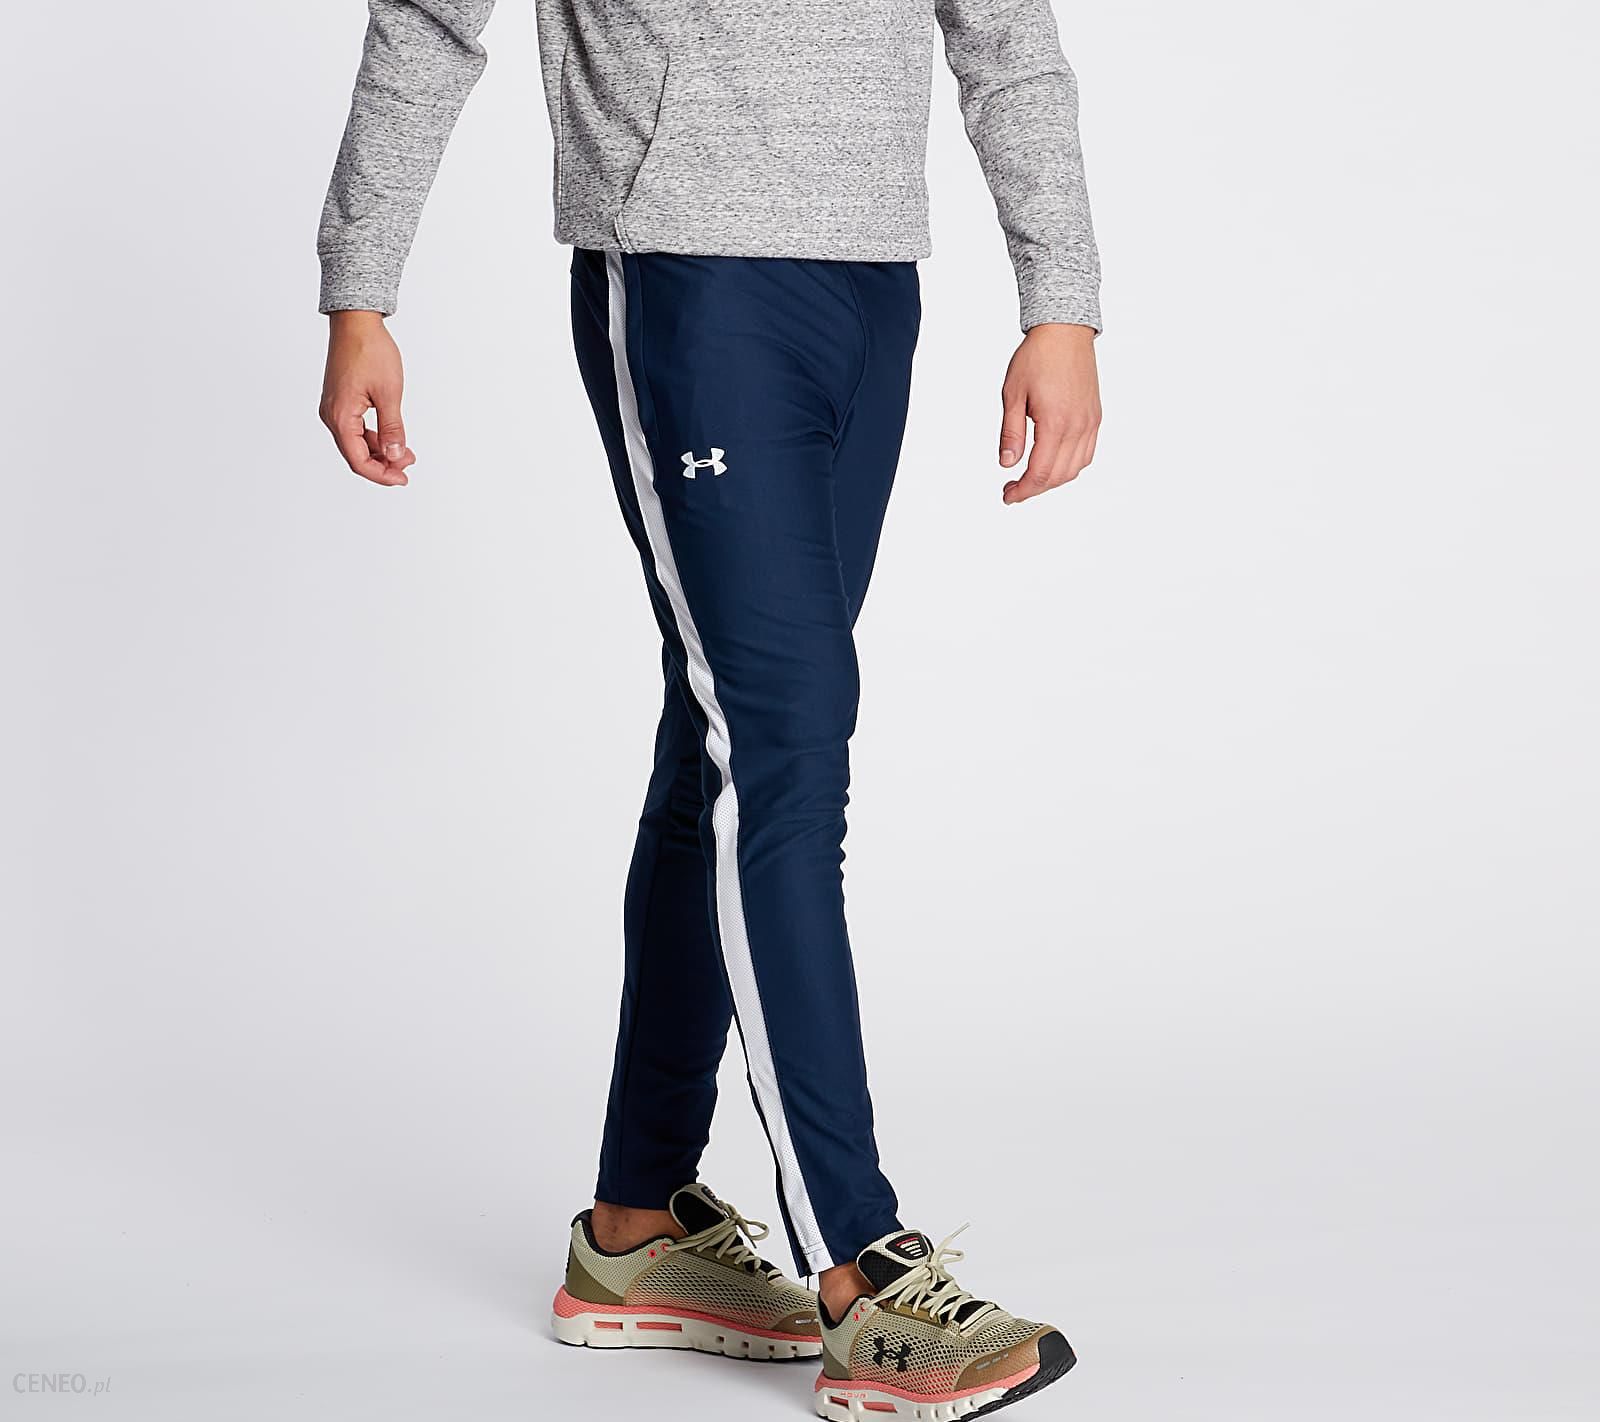 Under Armour Pique Track Pants Academy/White 1366203-408 - Free